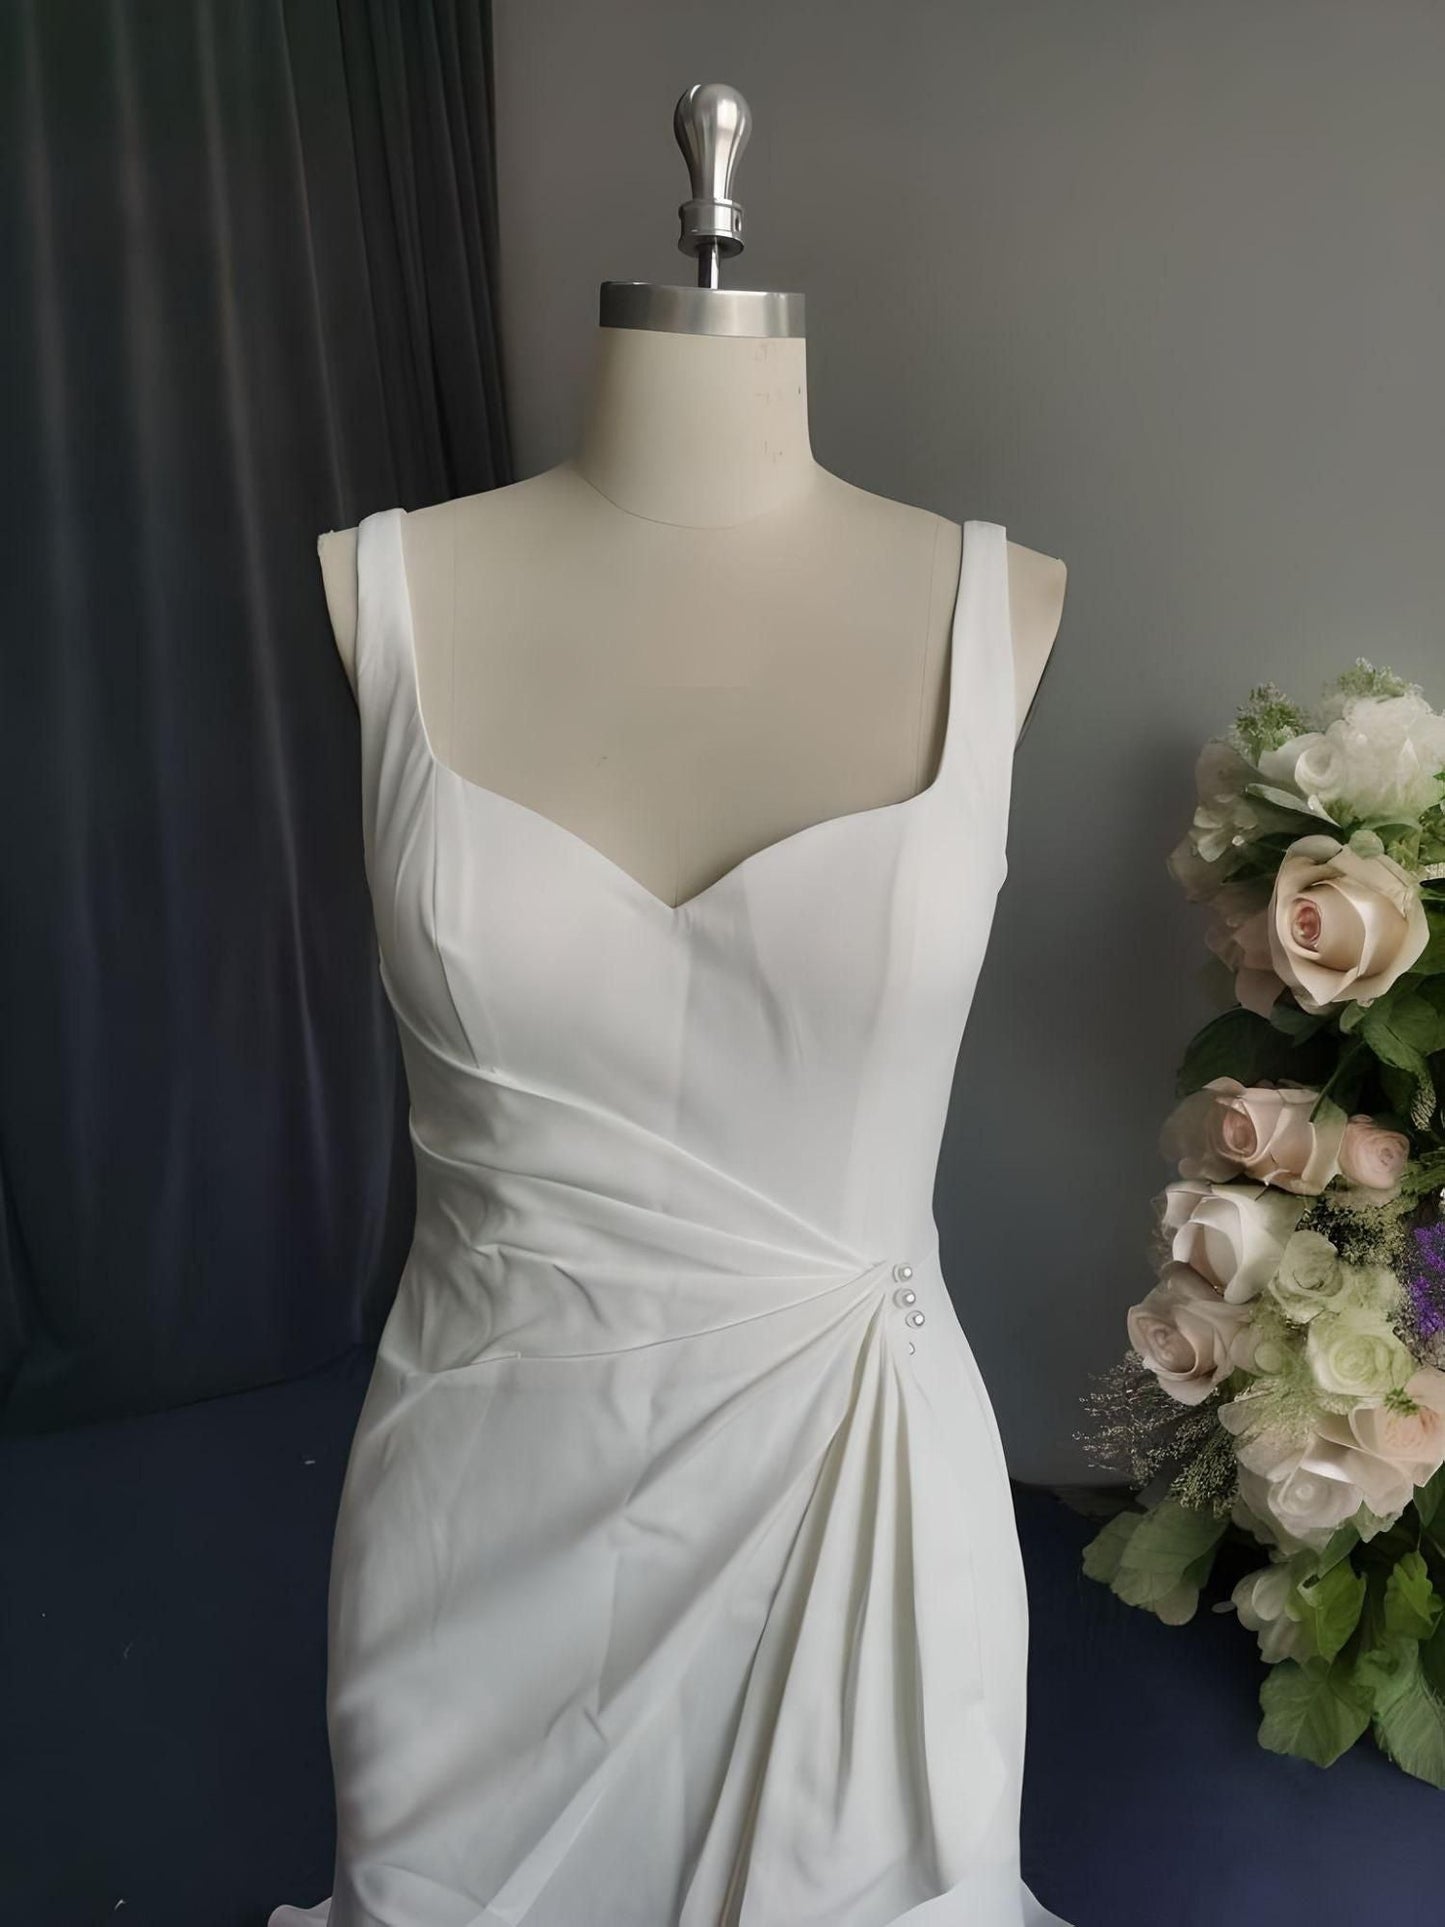 Detail  of weddding dress ruched waist which flatter every figure